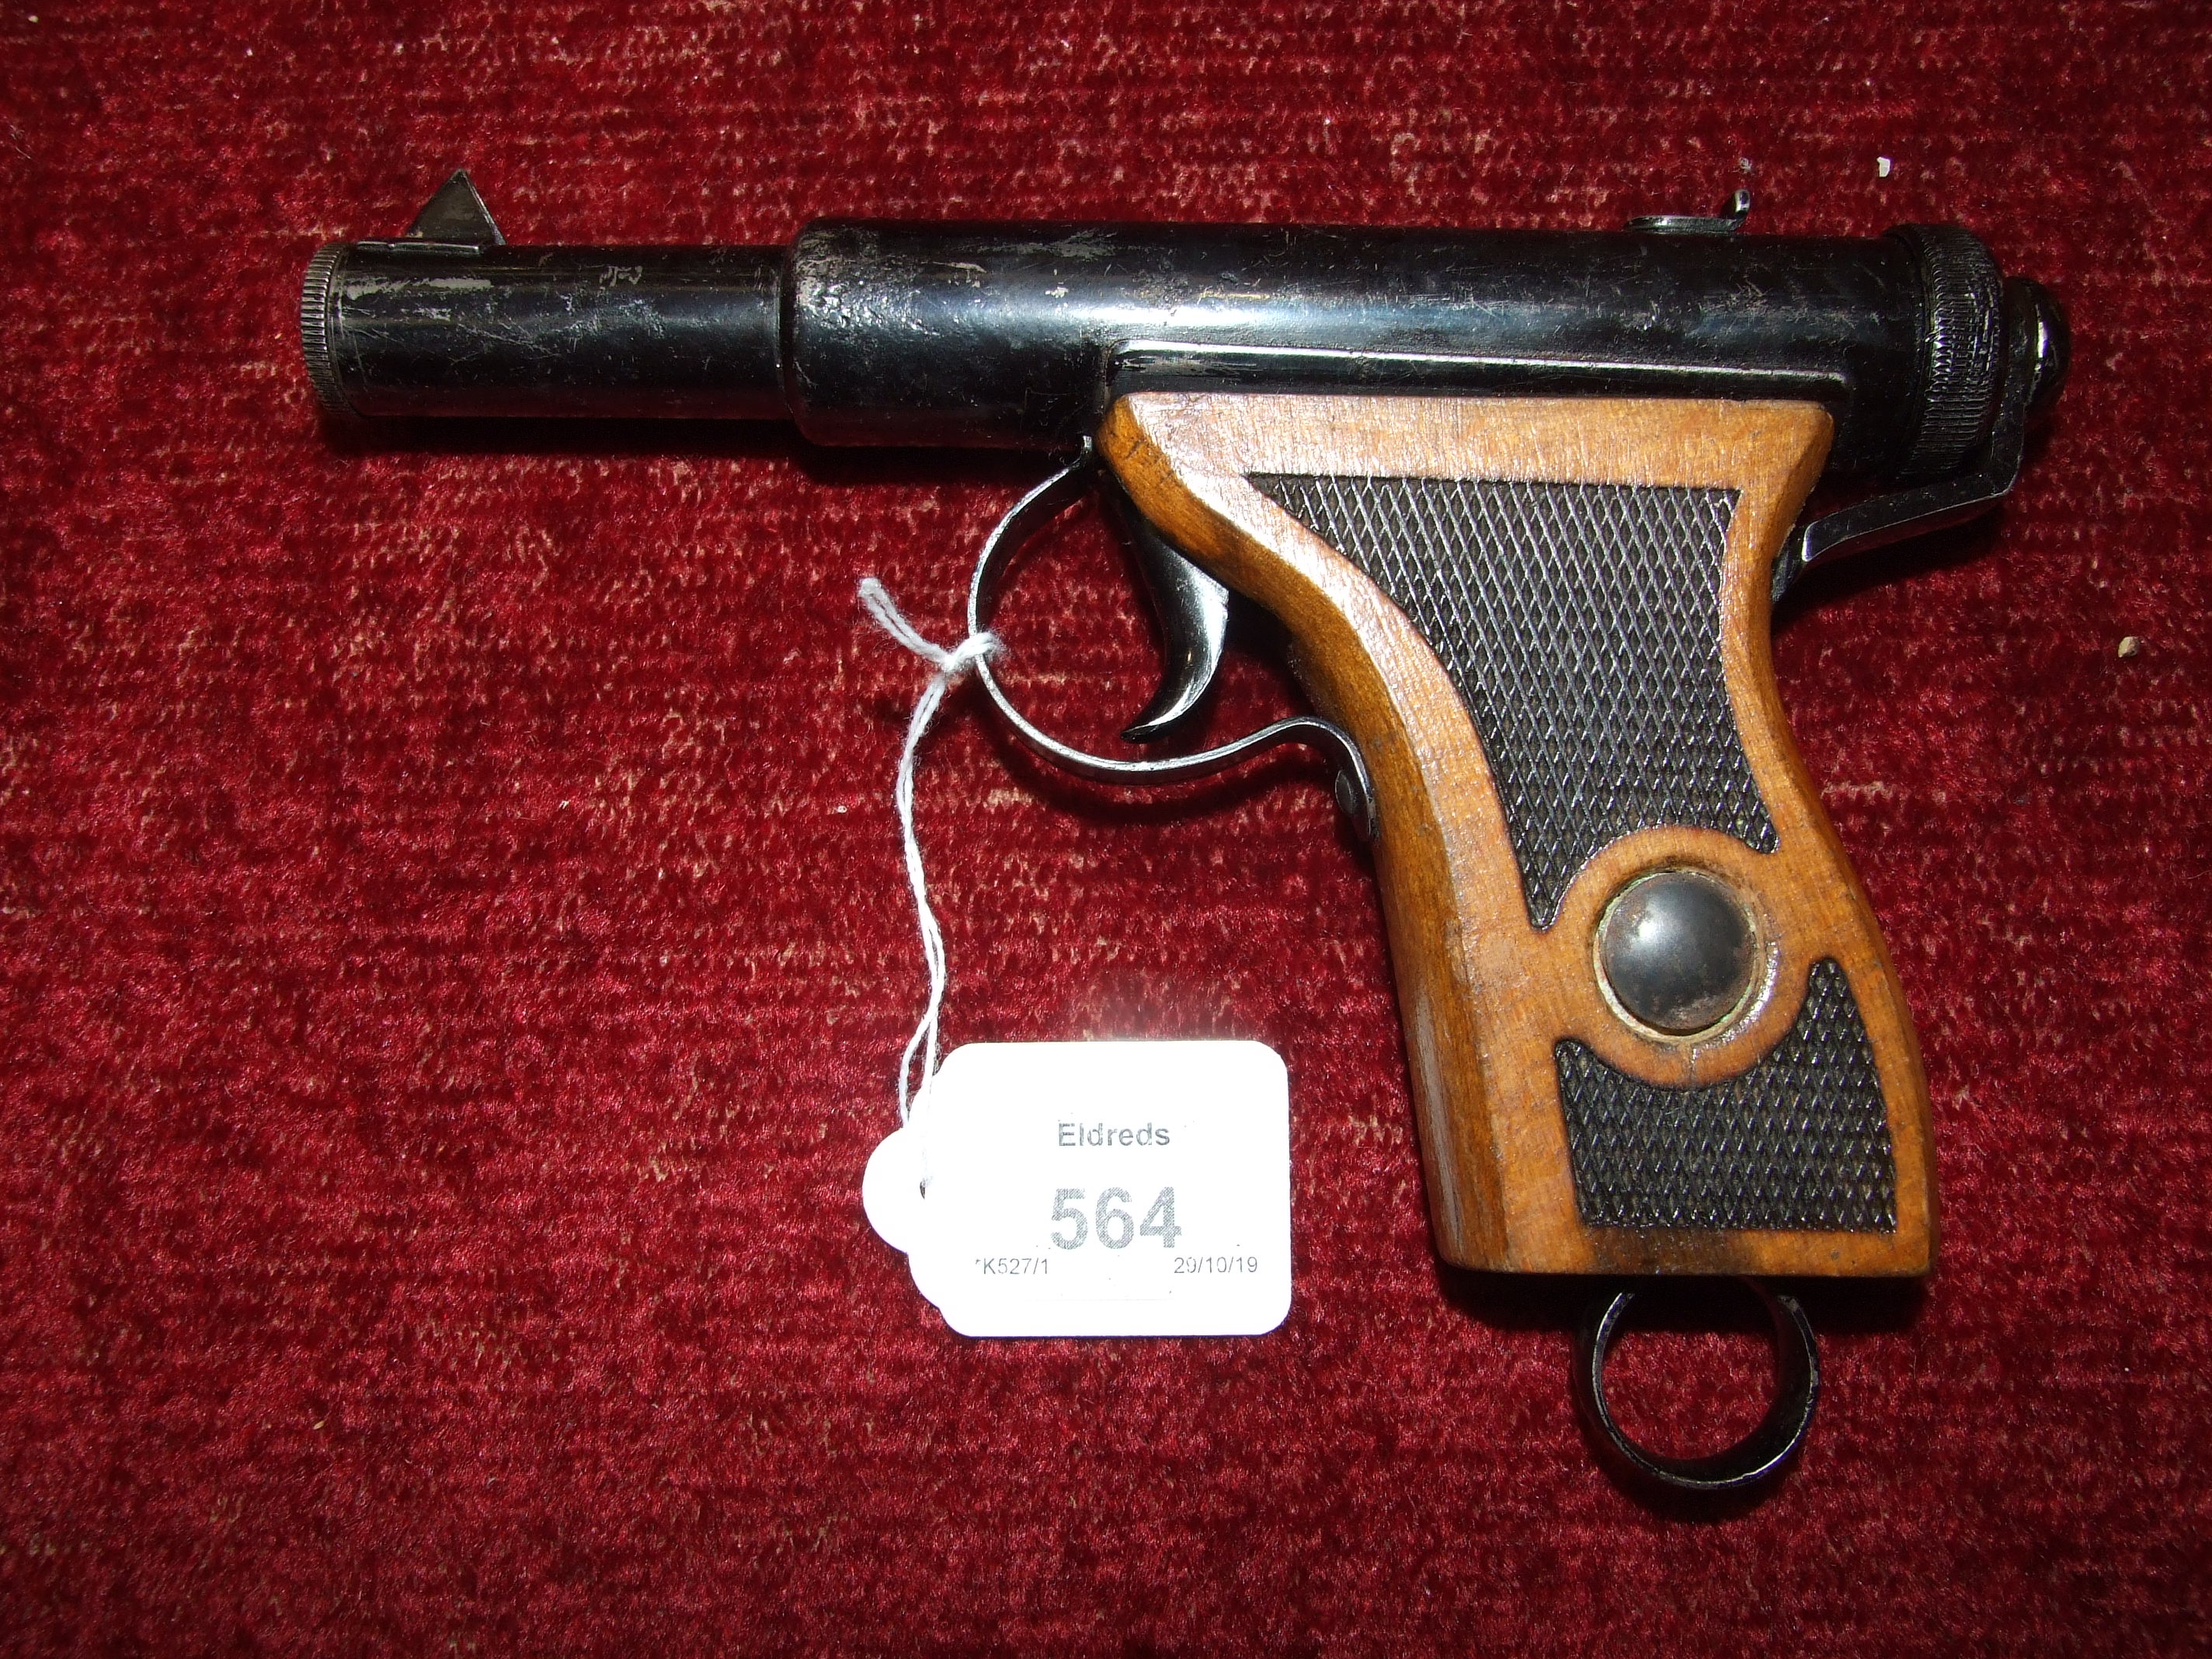 A .177 German Haenel model 100 lever-cocking air pistol marked 'Haenel Mod 100 - DRP', the one-piece